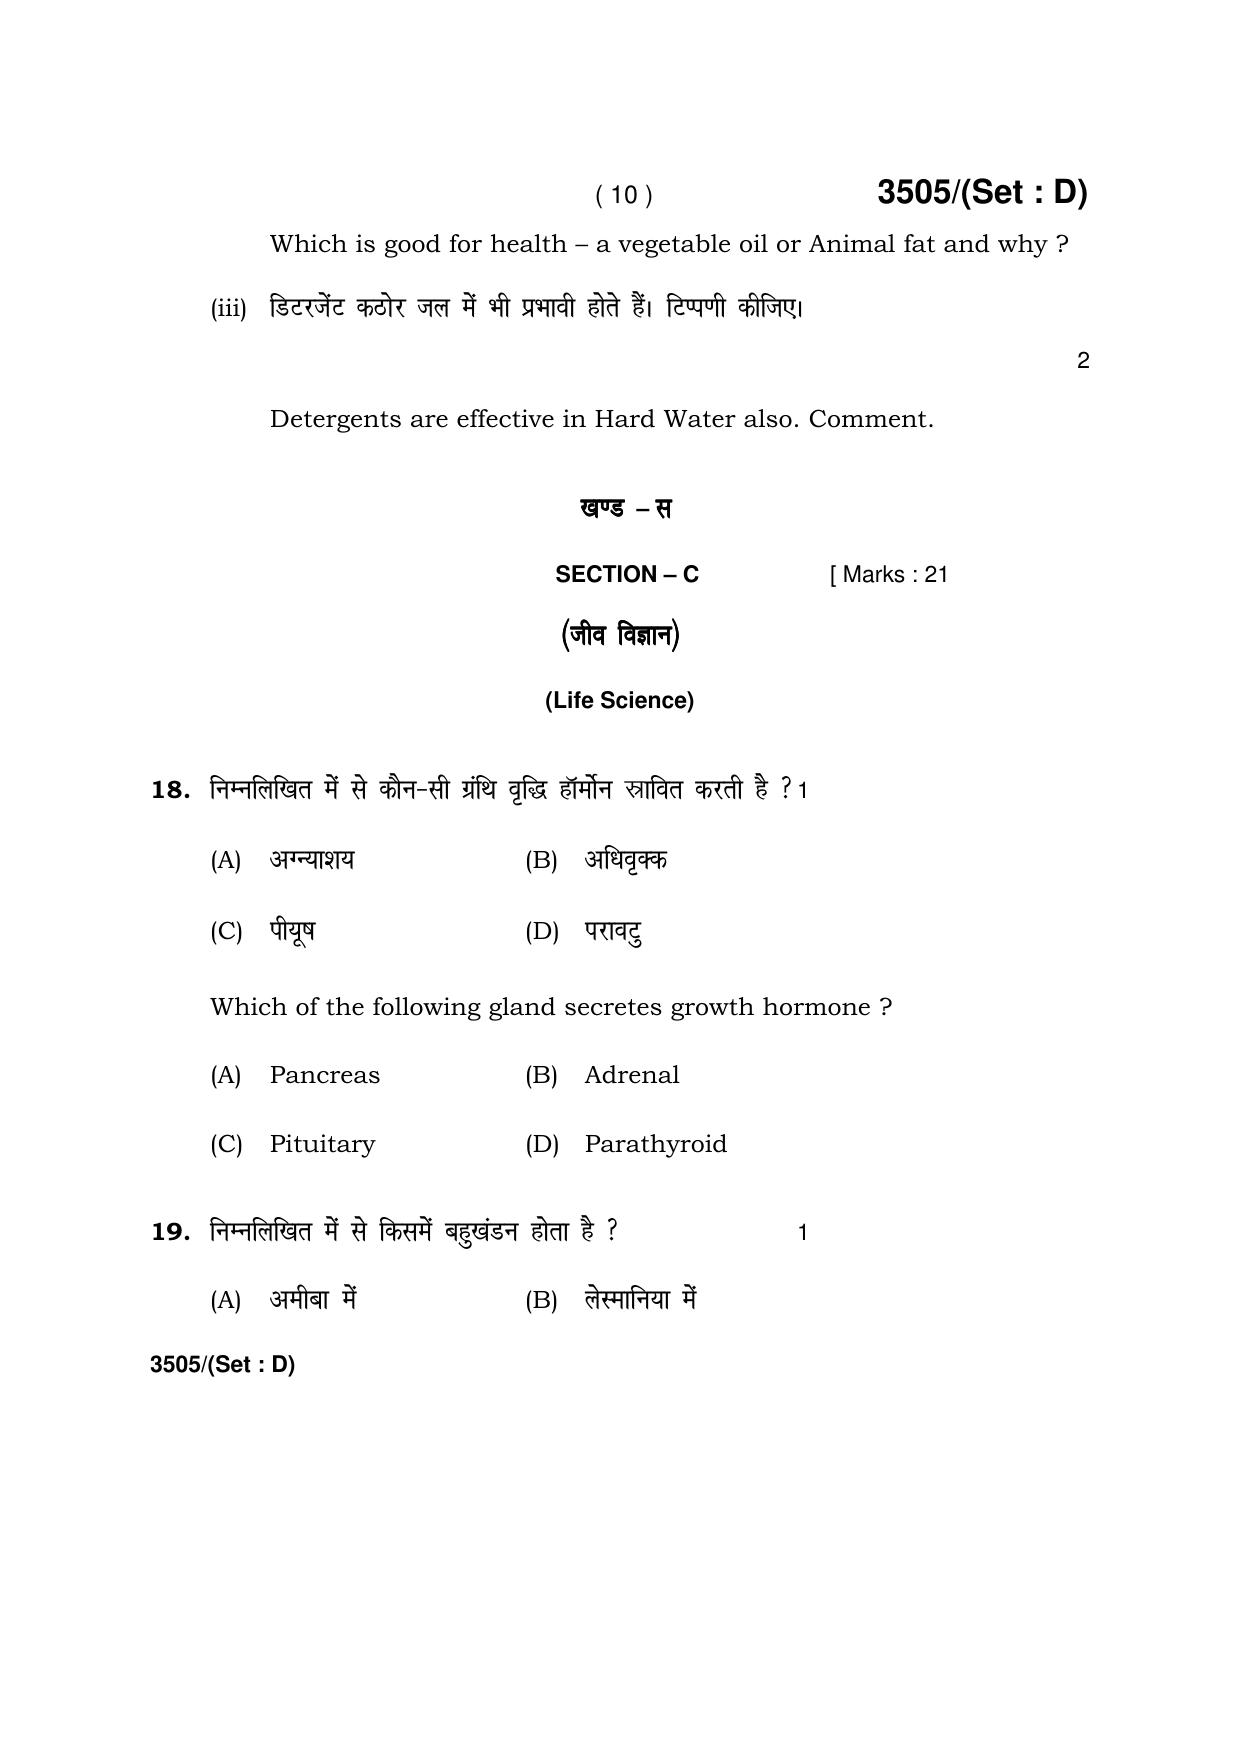 Haryana Board HBSE Class 10 Science -D 2018 Question Paper - Page 10